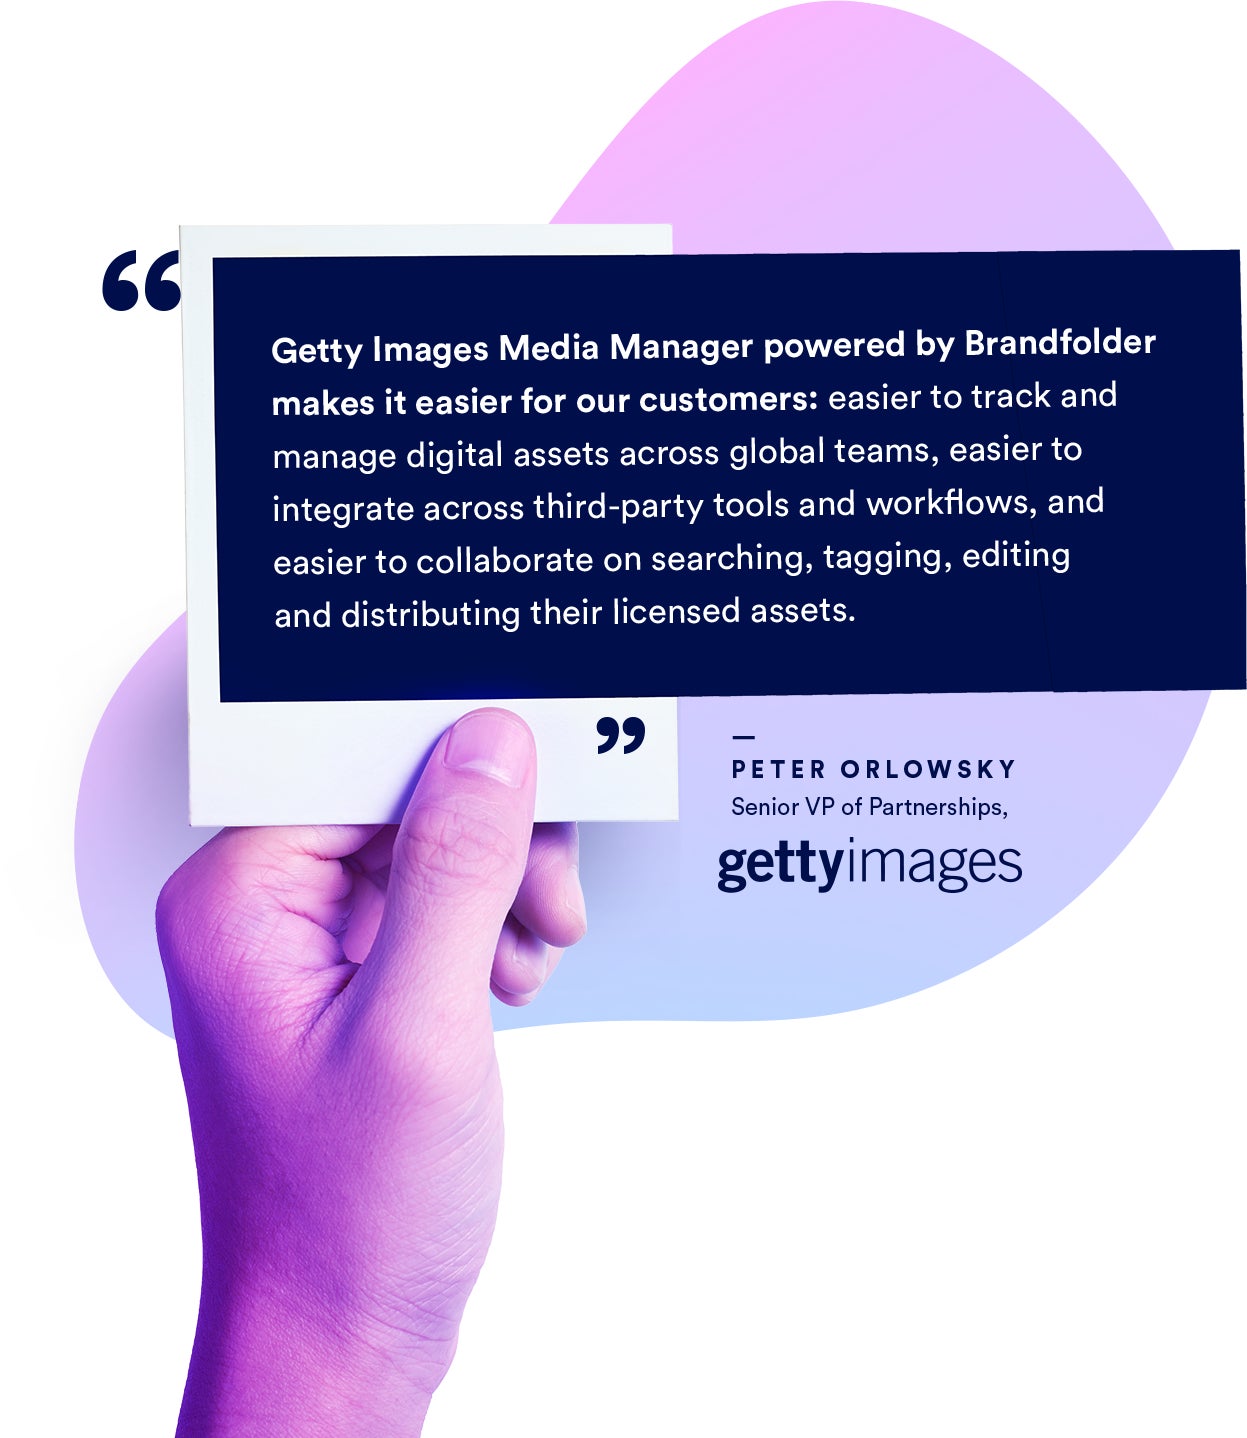 Getty Images quote from Peter Orlowsky